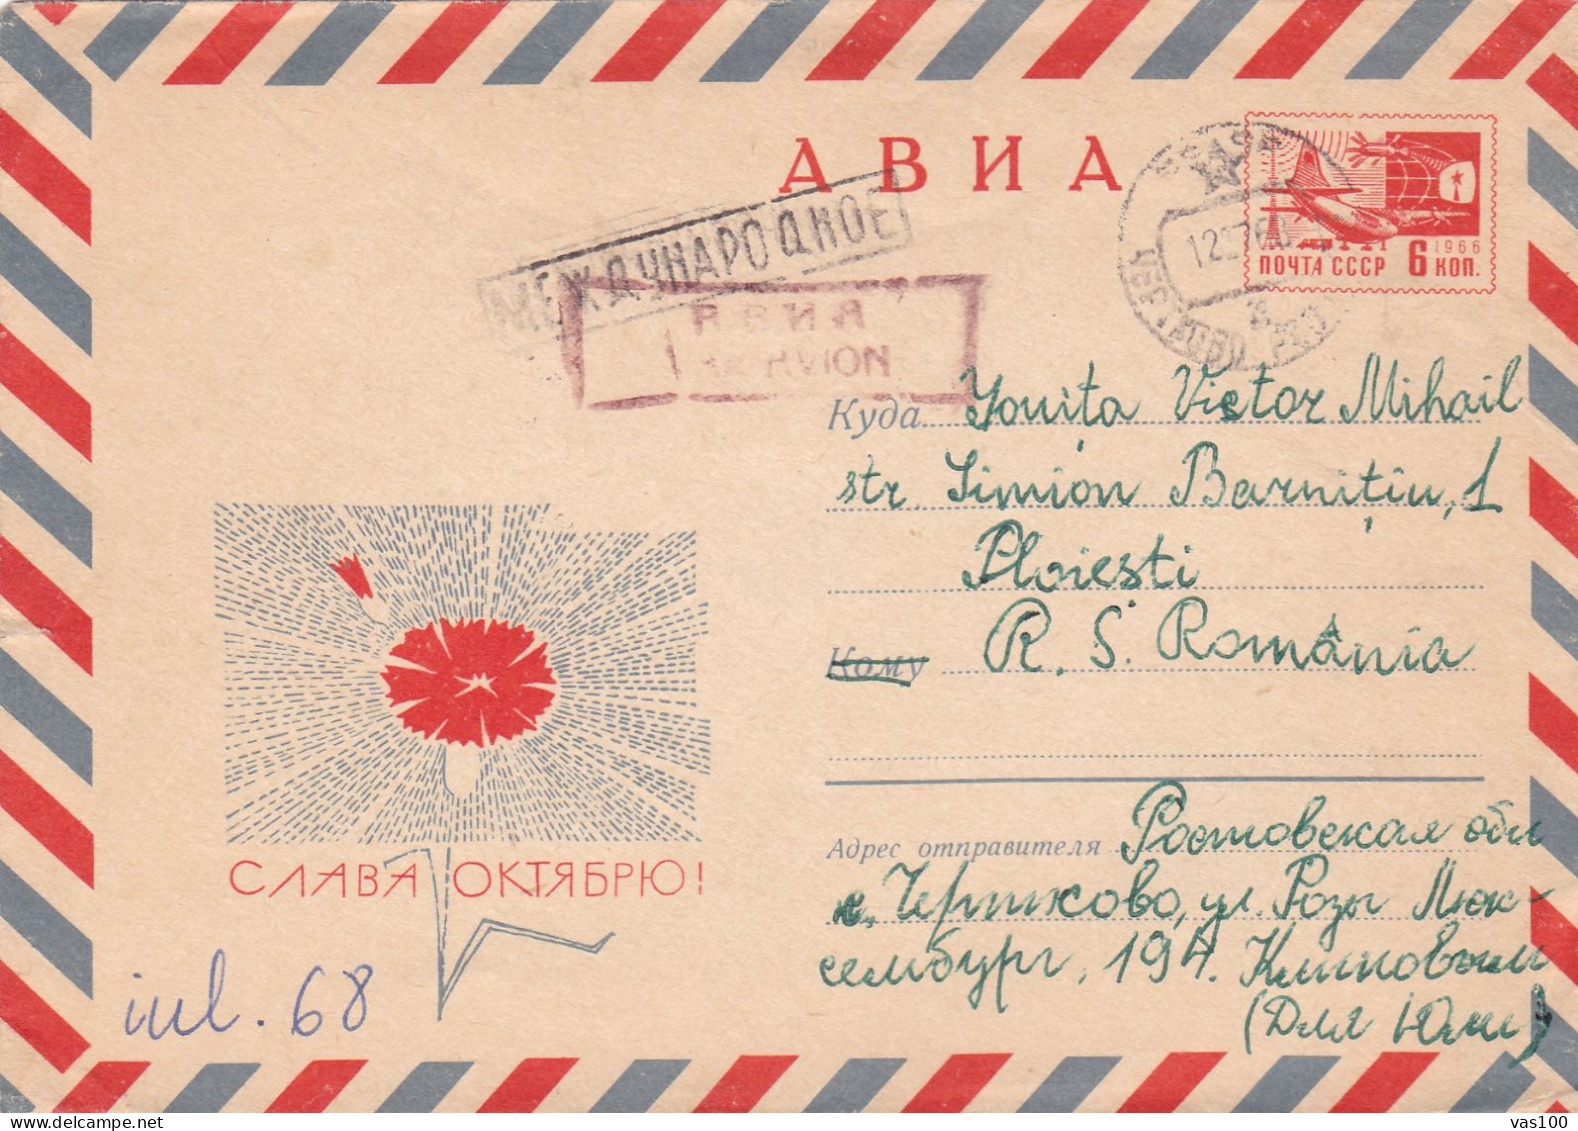 COVERS STATIONERY , 1968, RUSSIA - Stamped Stationery